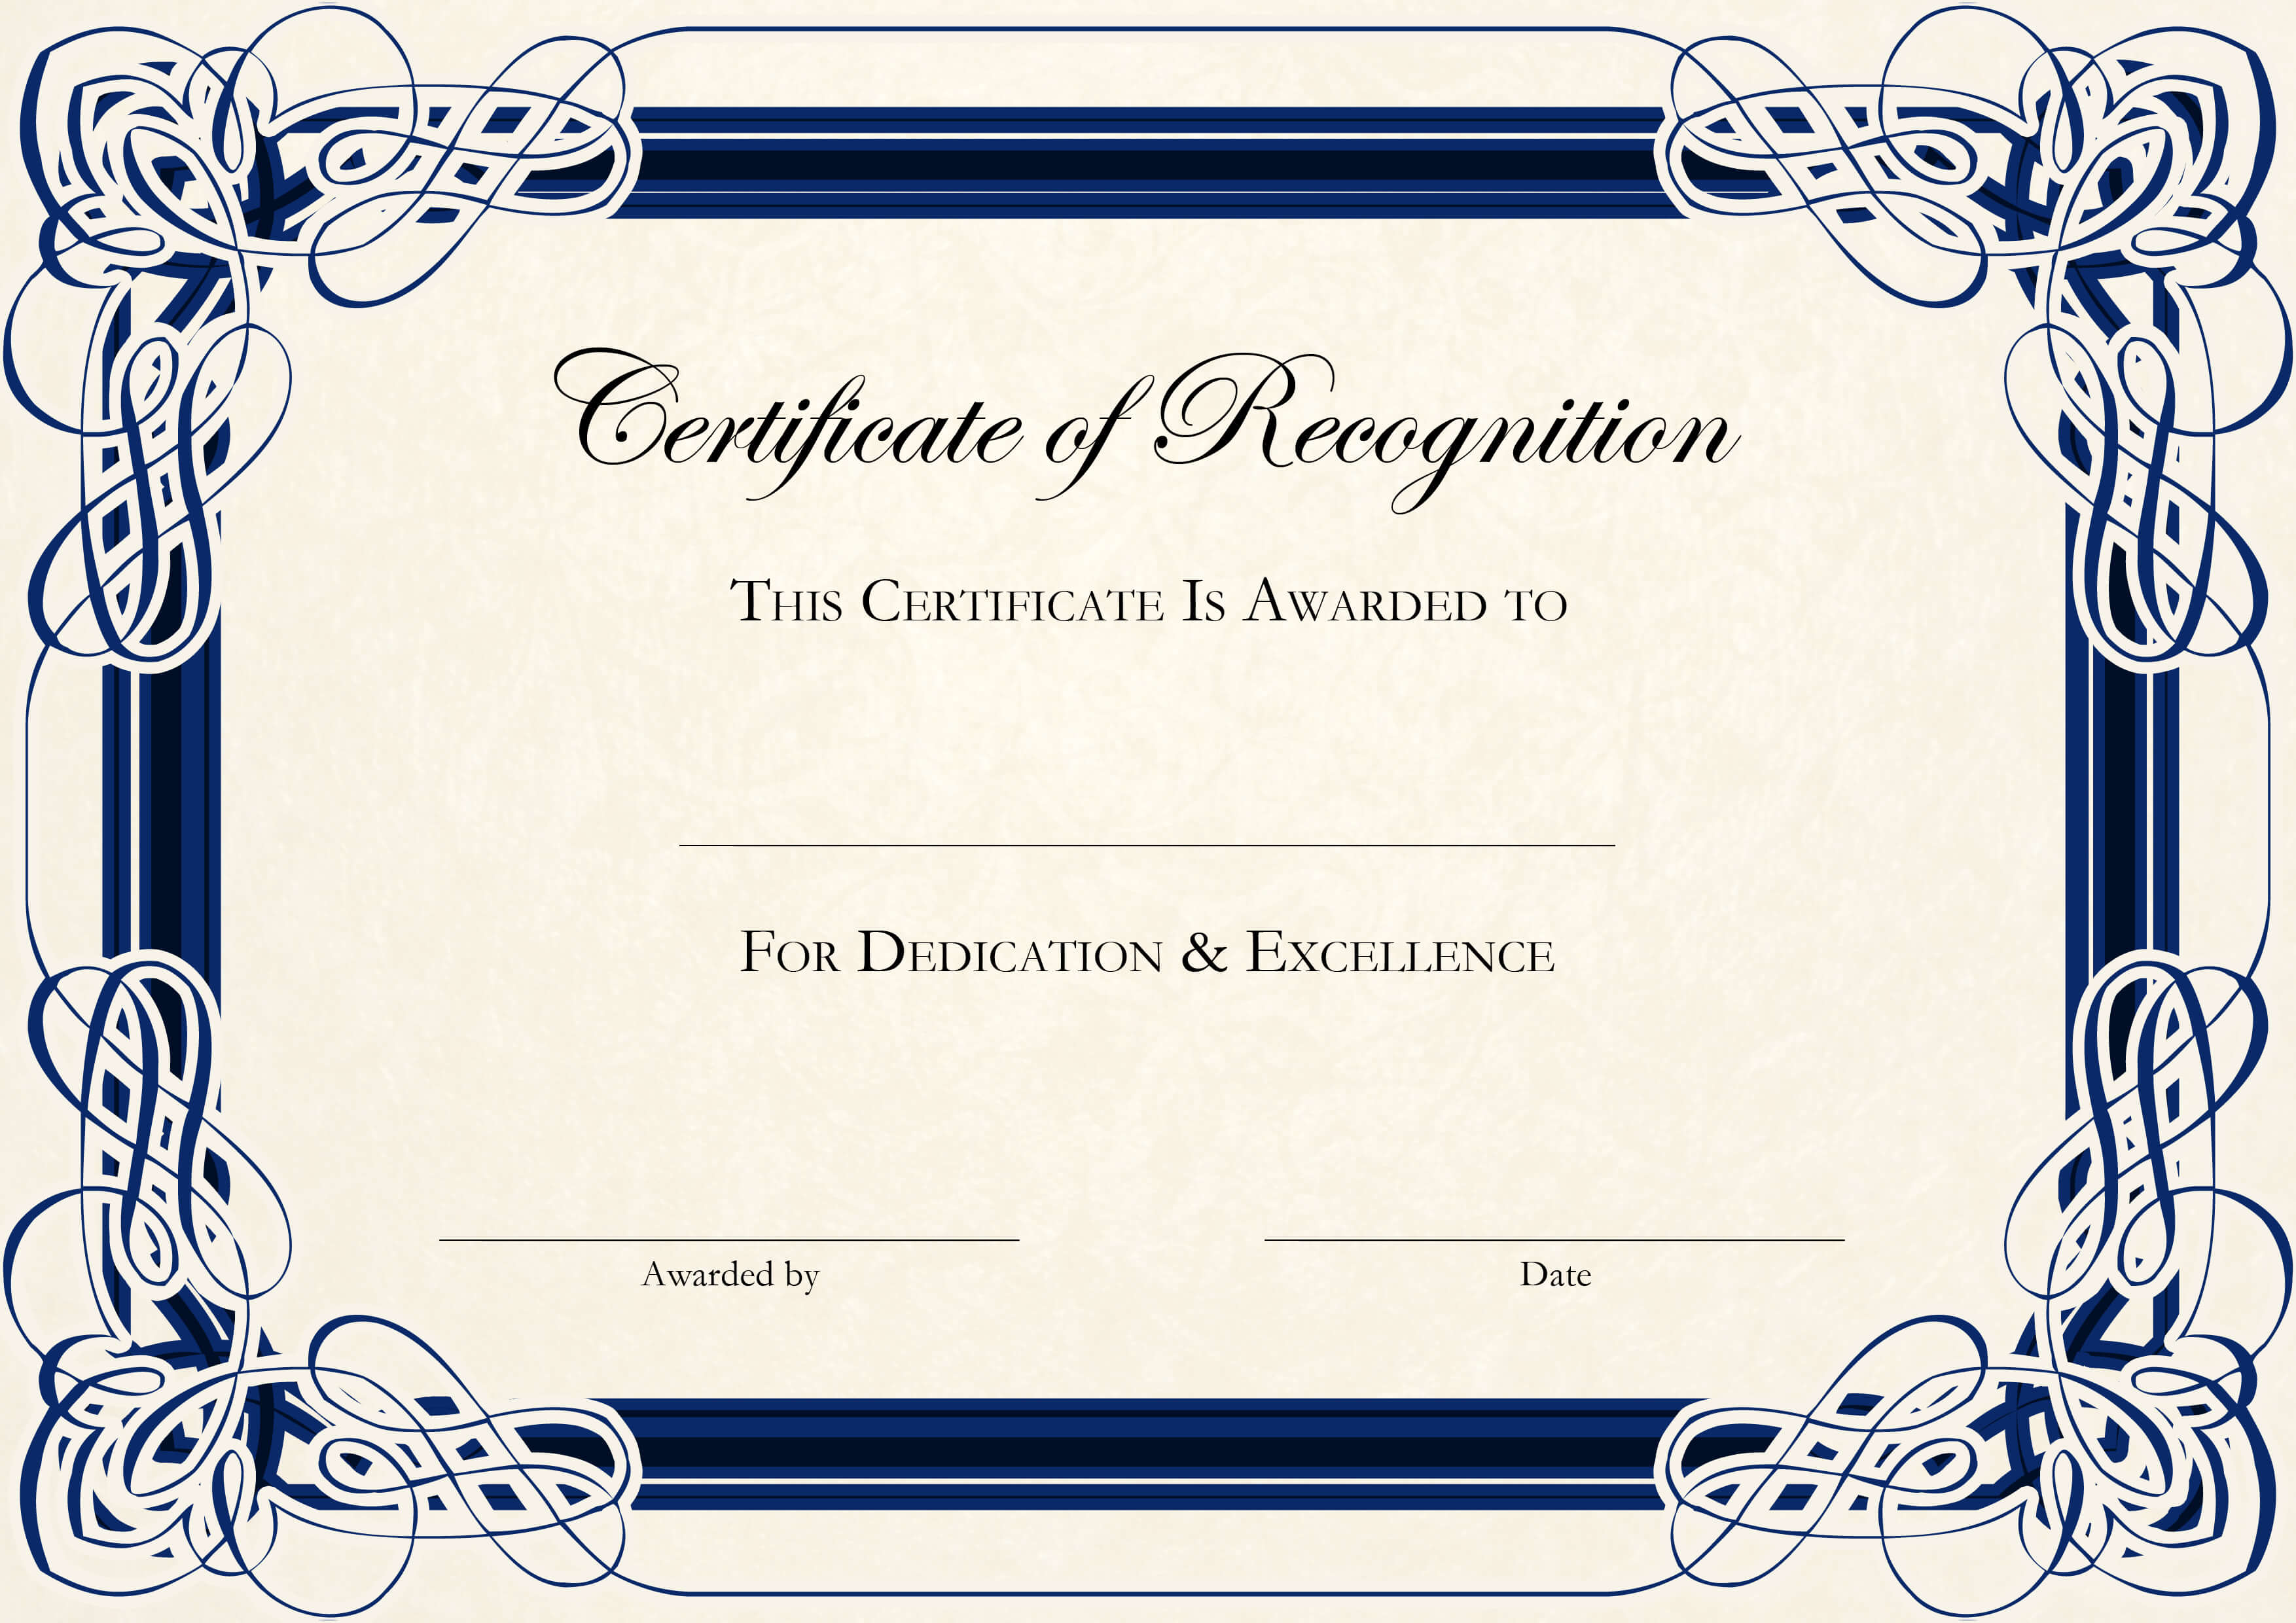 Pdf Award Authority Certificate Template In Certificate Authority Templates